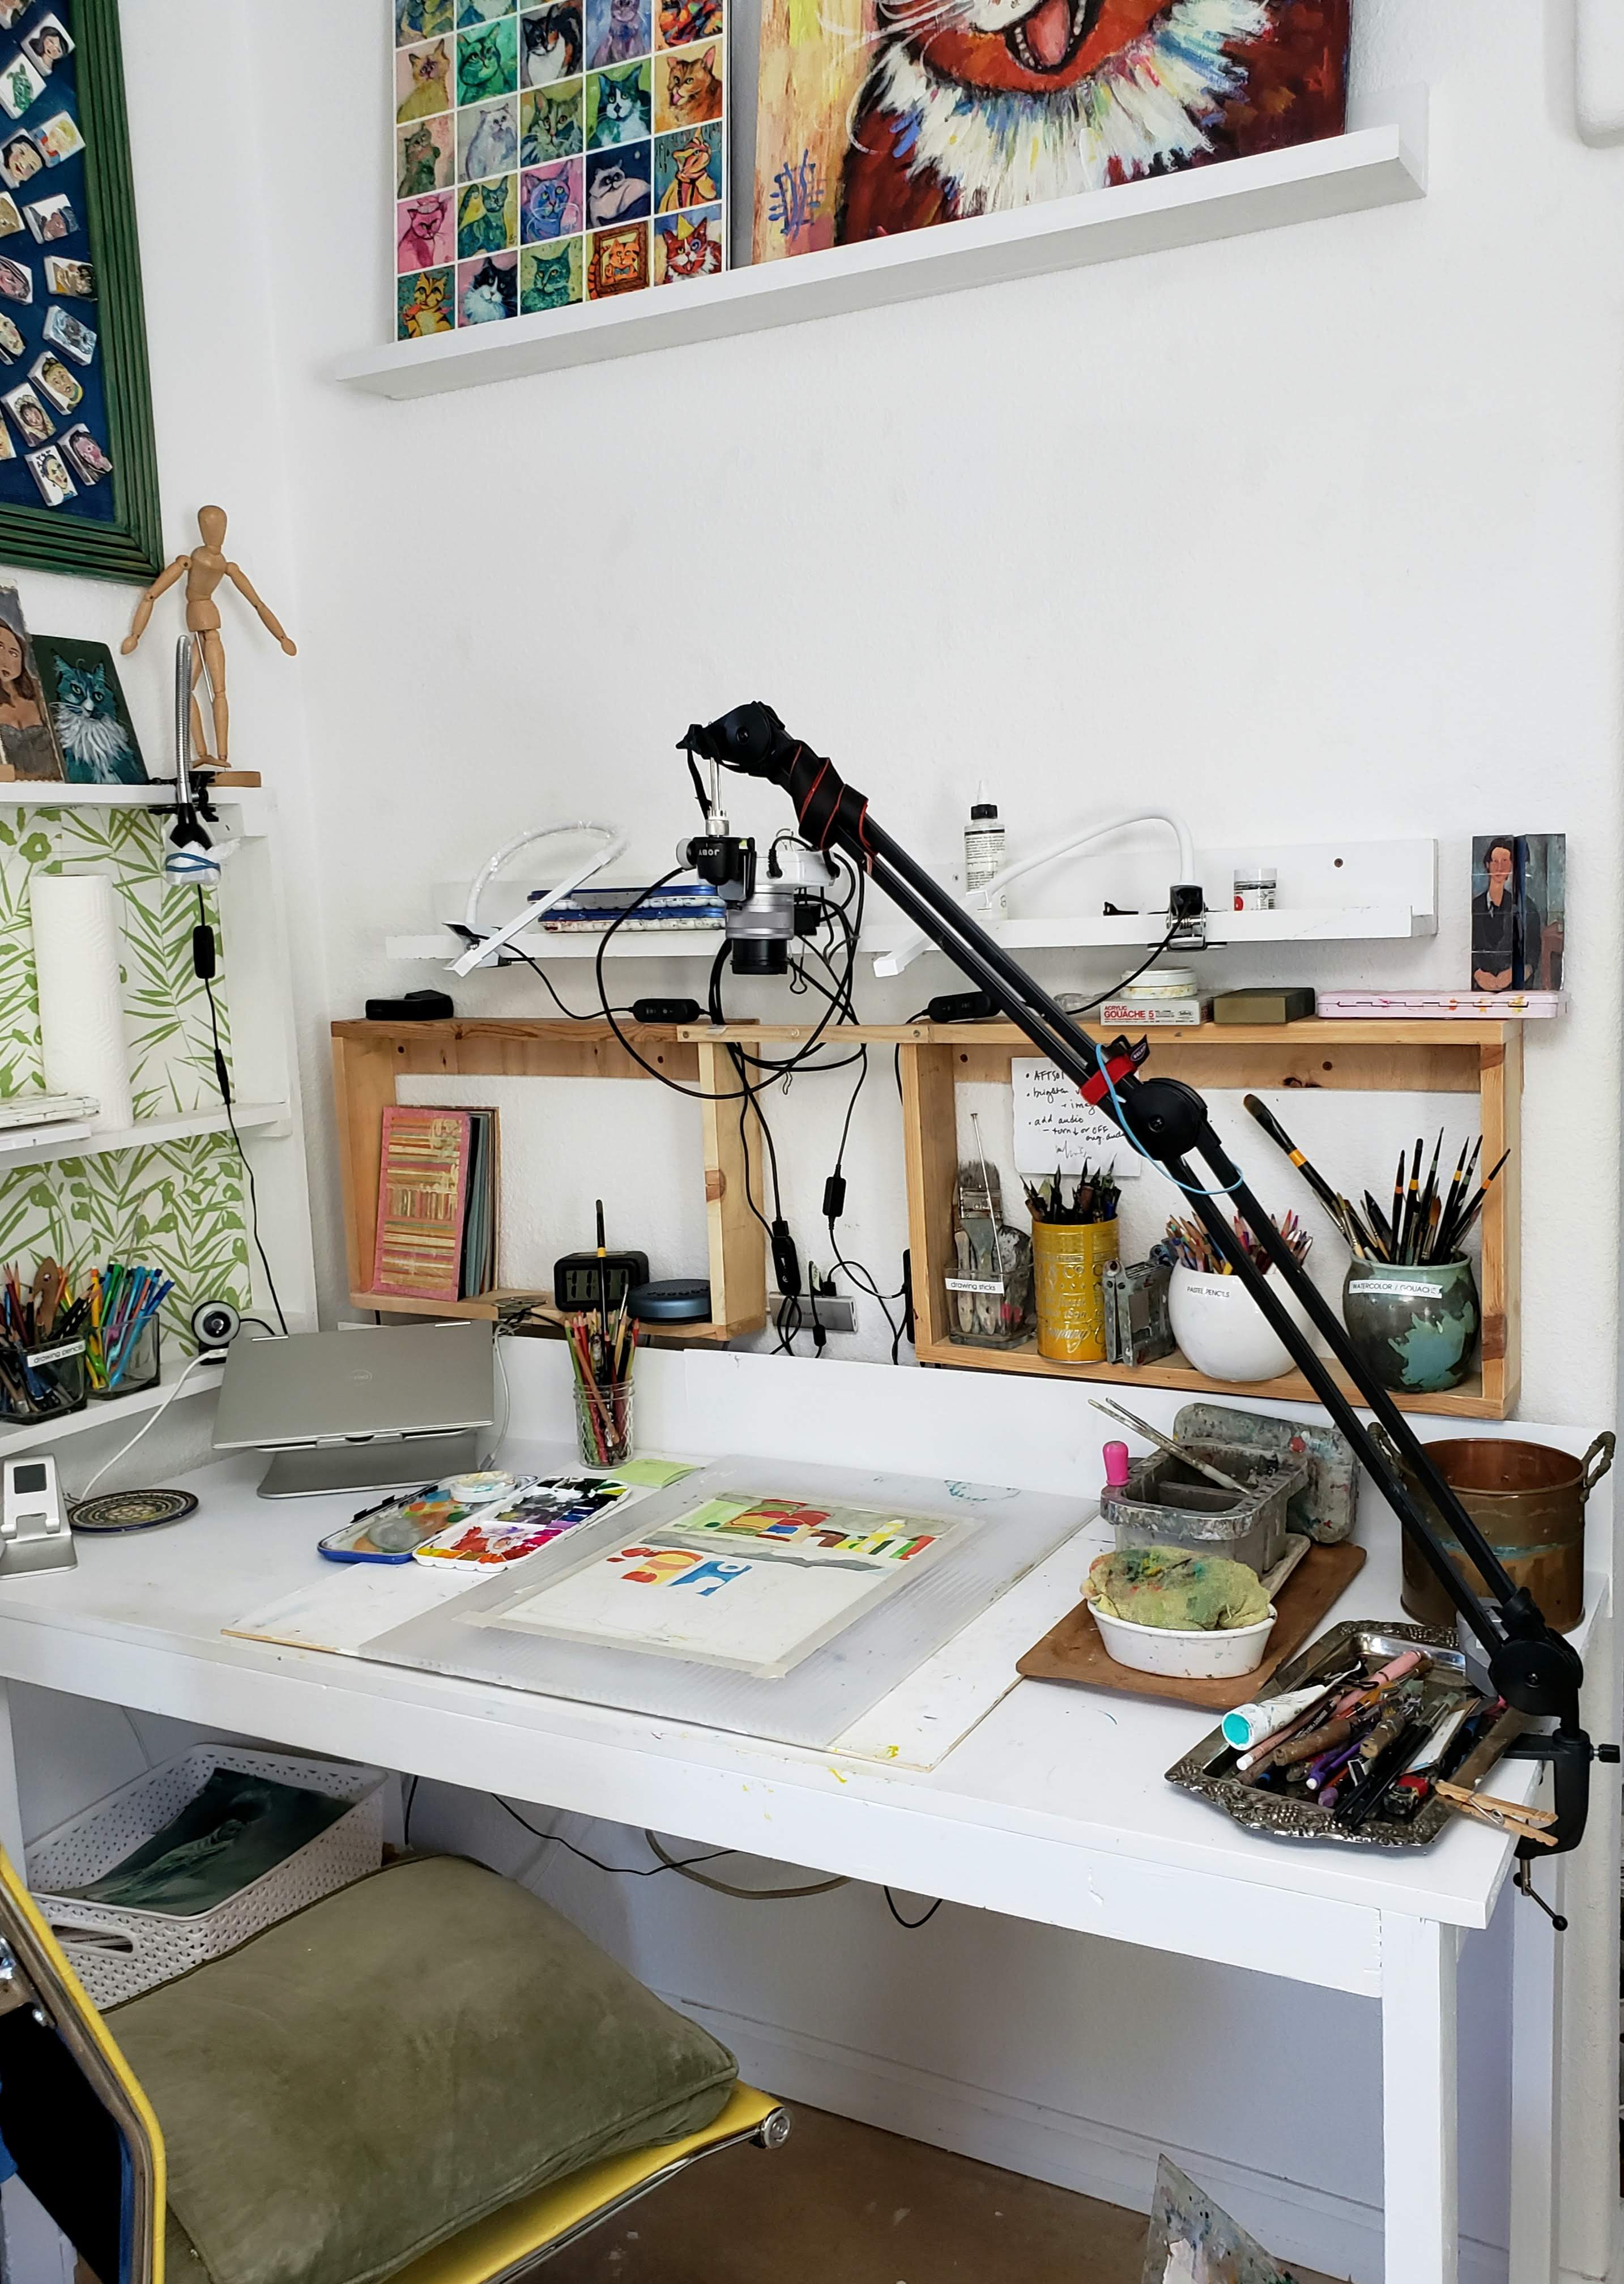 Setting Up and Organizing Your Art Studio - from Fountain Studio